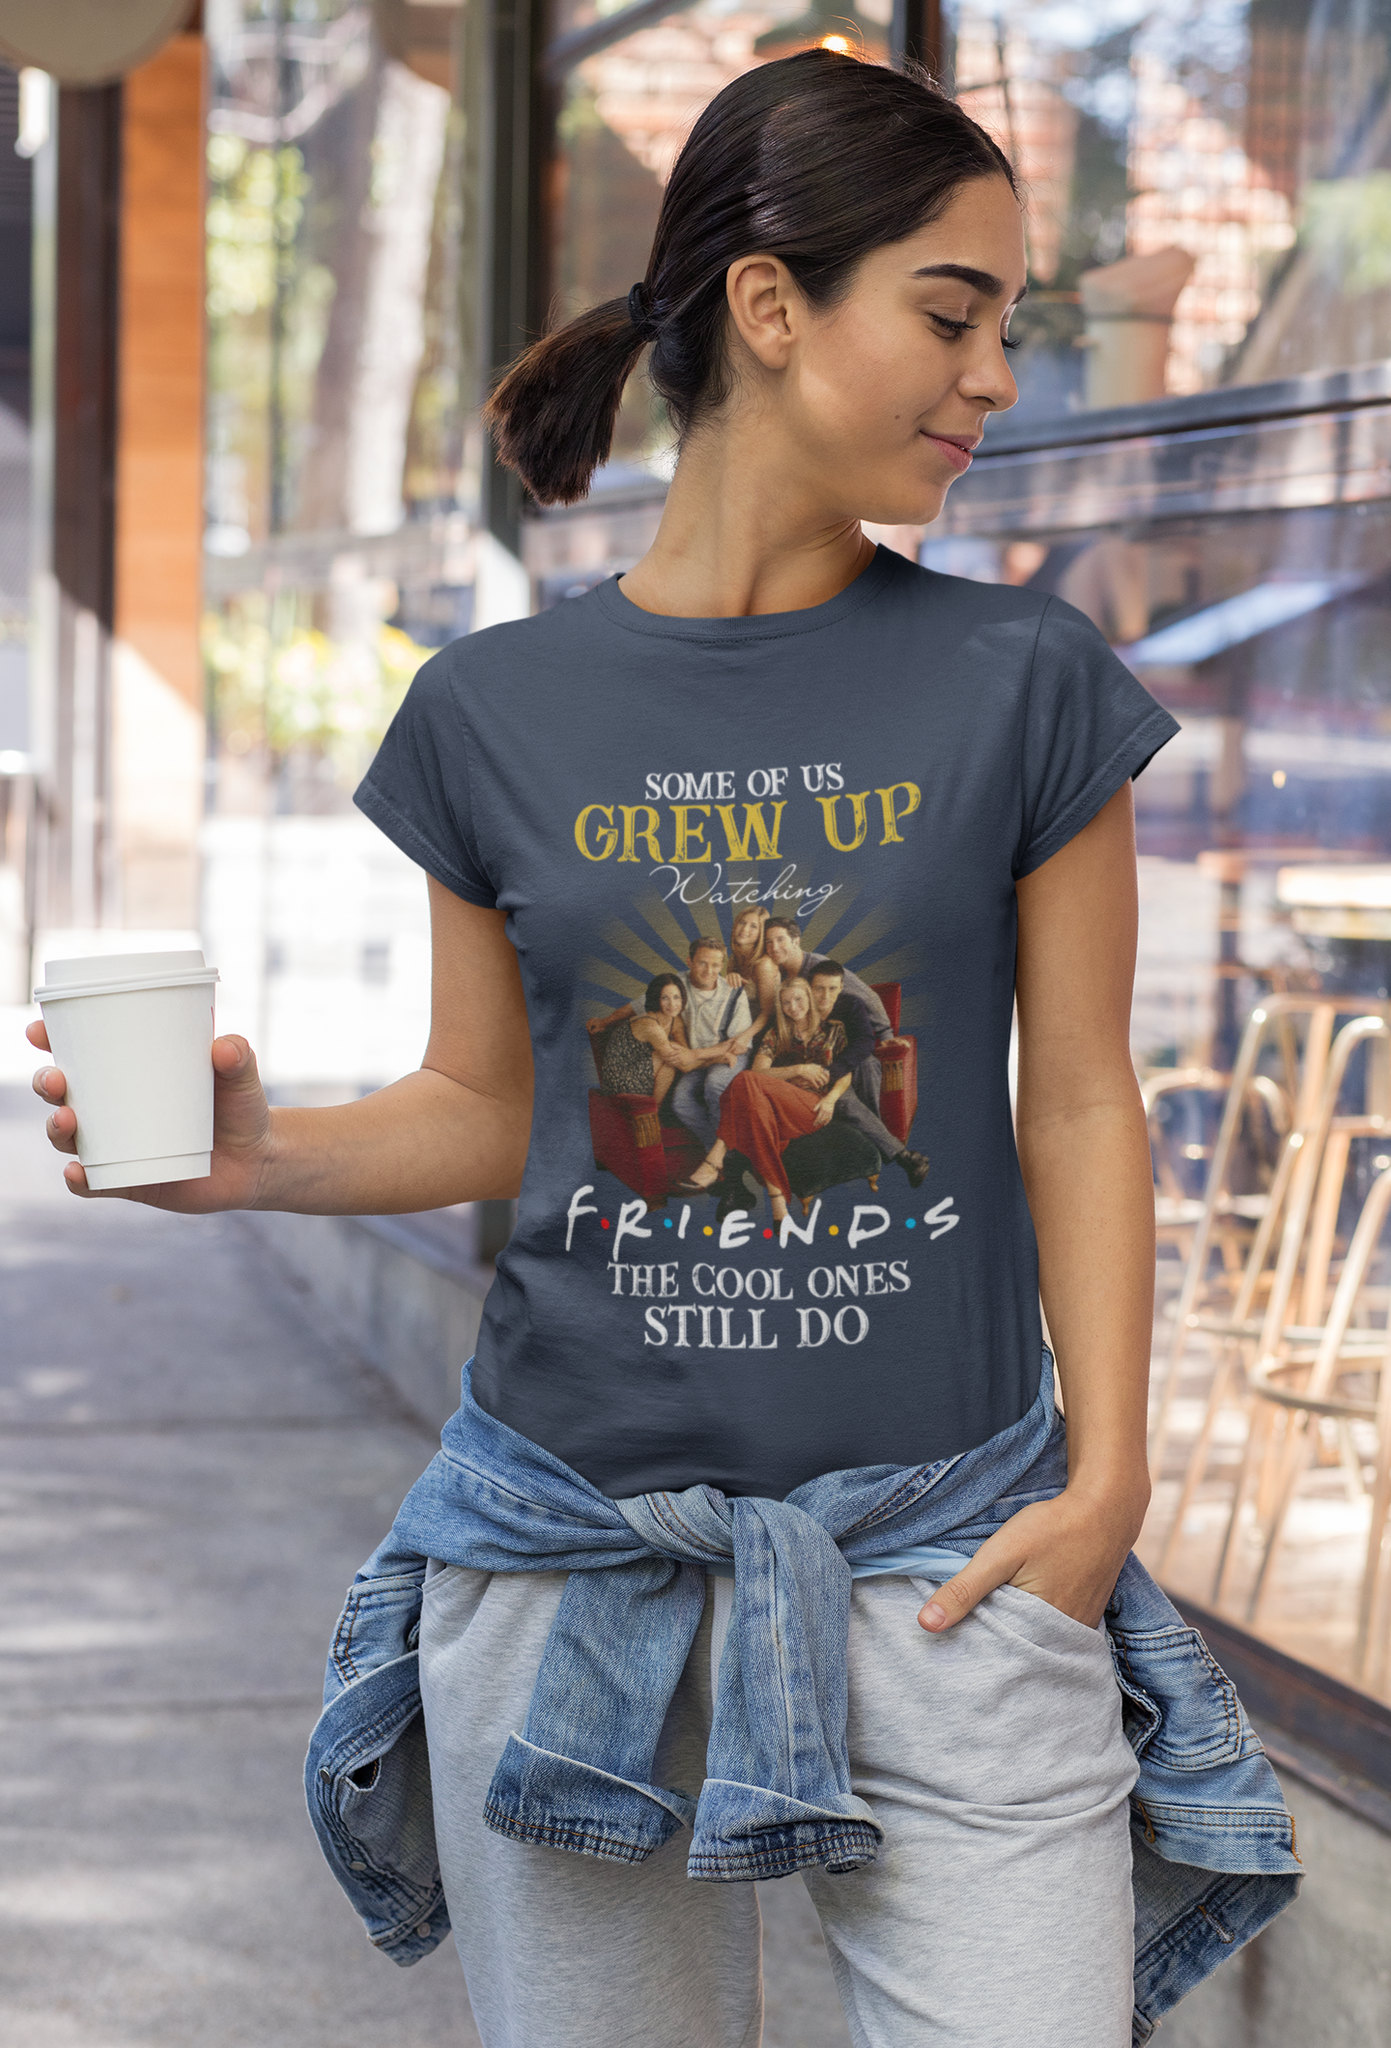 Friends TV Show T Shirt, Friends Shirt, Friends Characters T Shirt, Some Of Us Grew Up Watching Friends The Cool Ones Still Do Tshirt